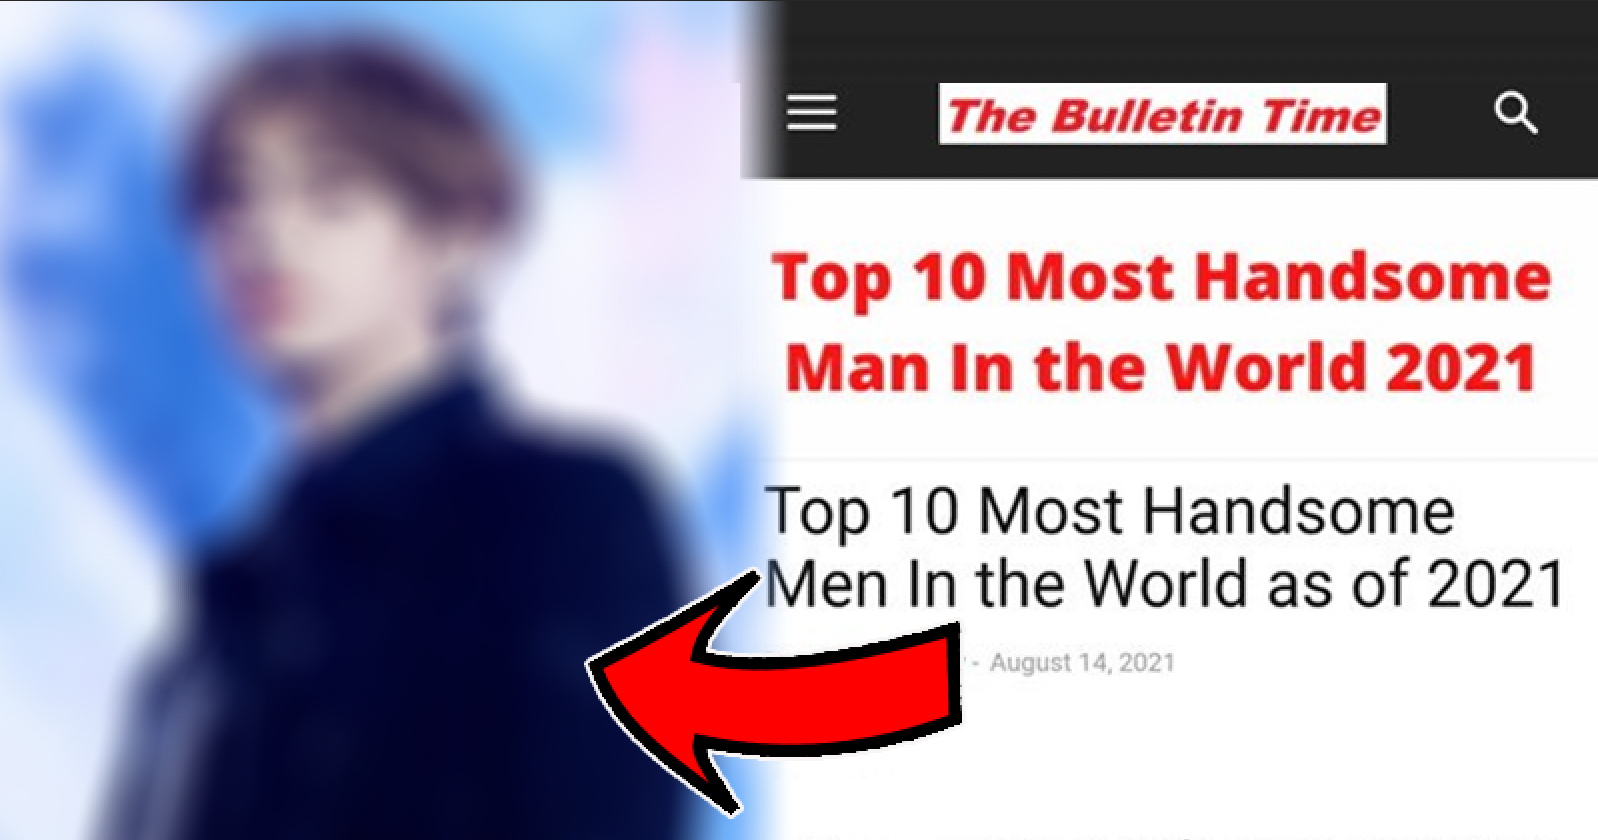 Two Media Outlets Select Member of BTS As The Most Handsome Man of 2021